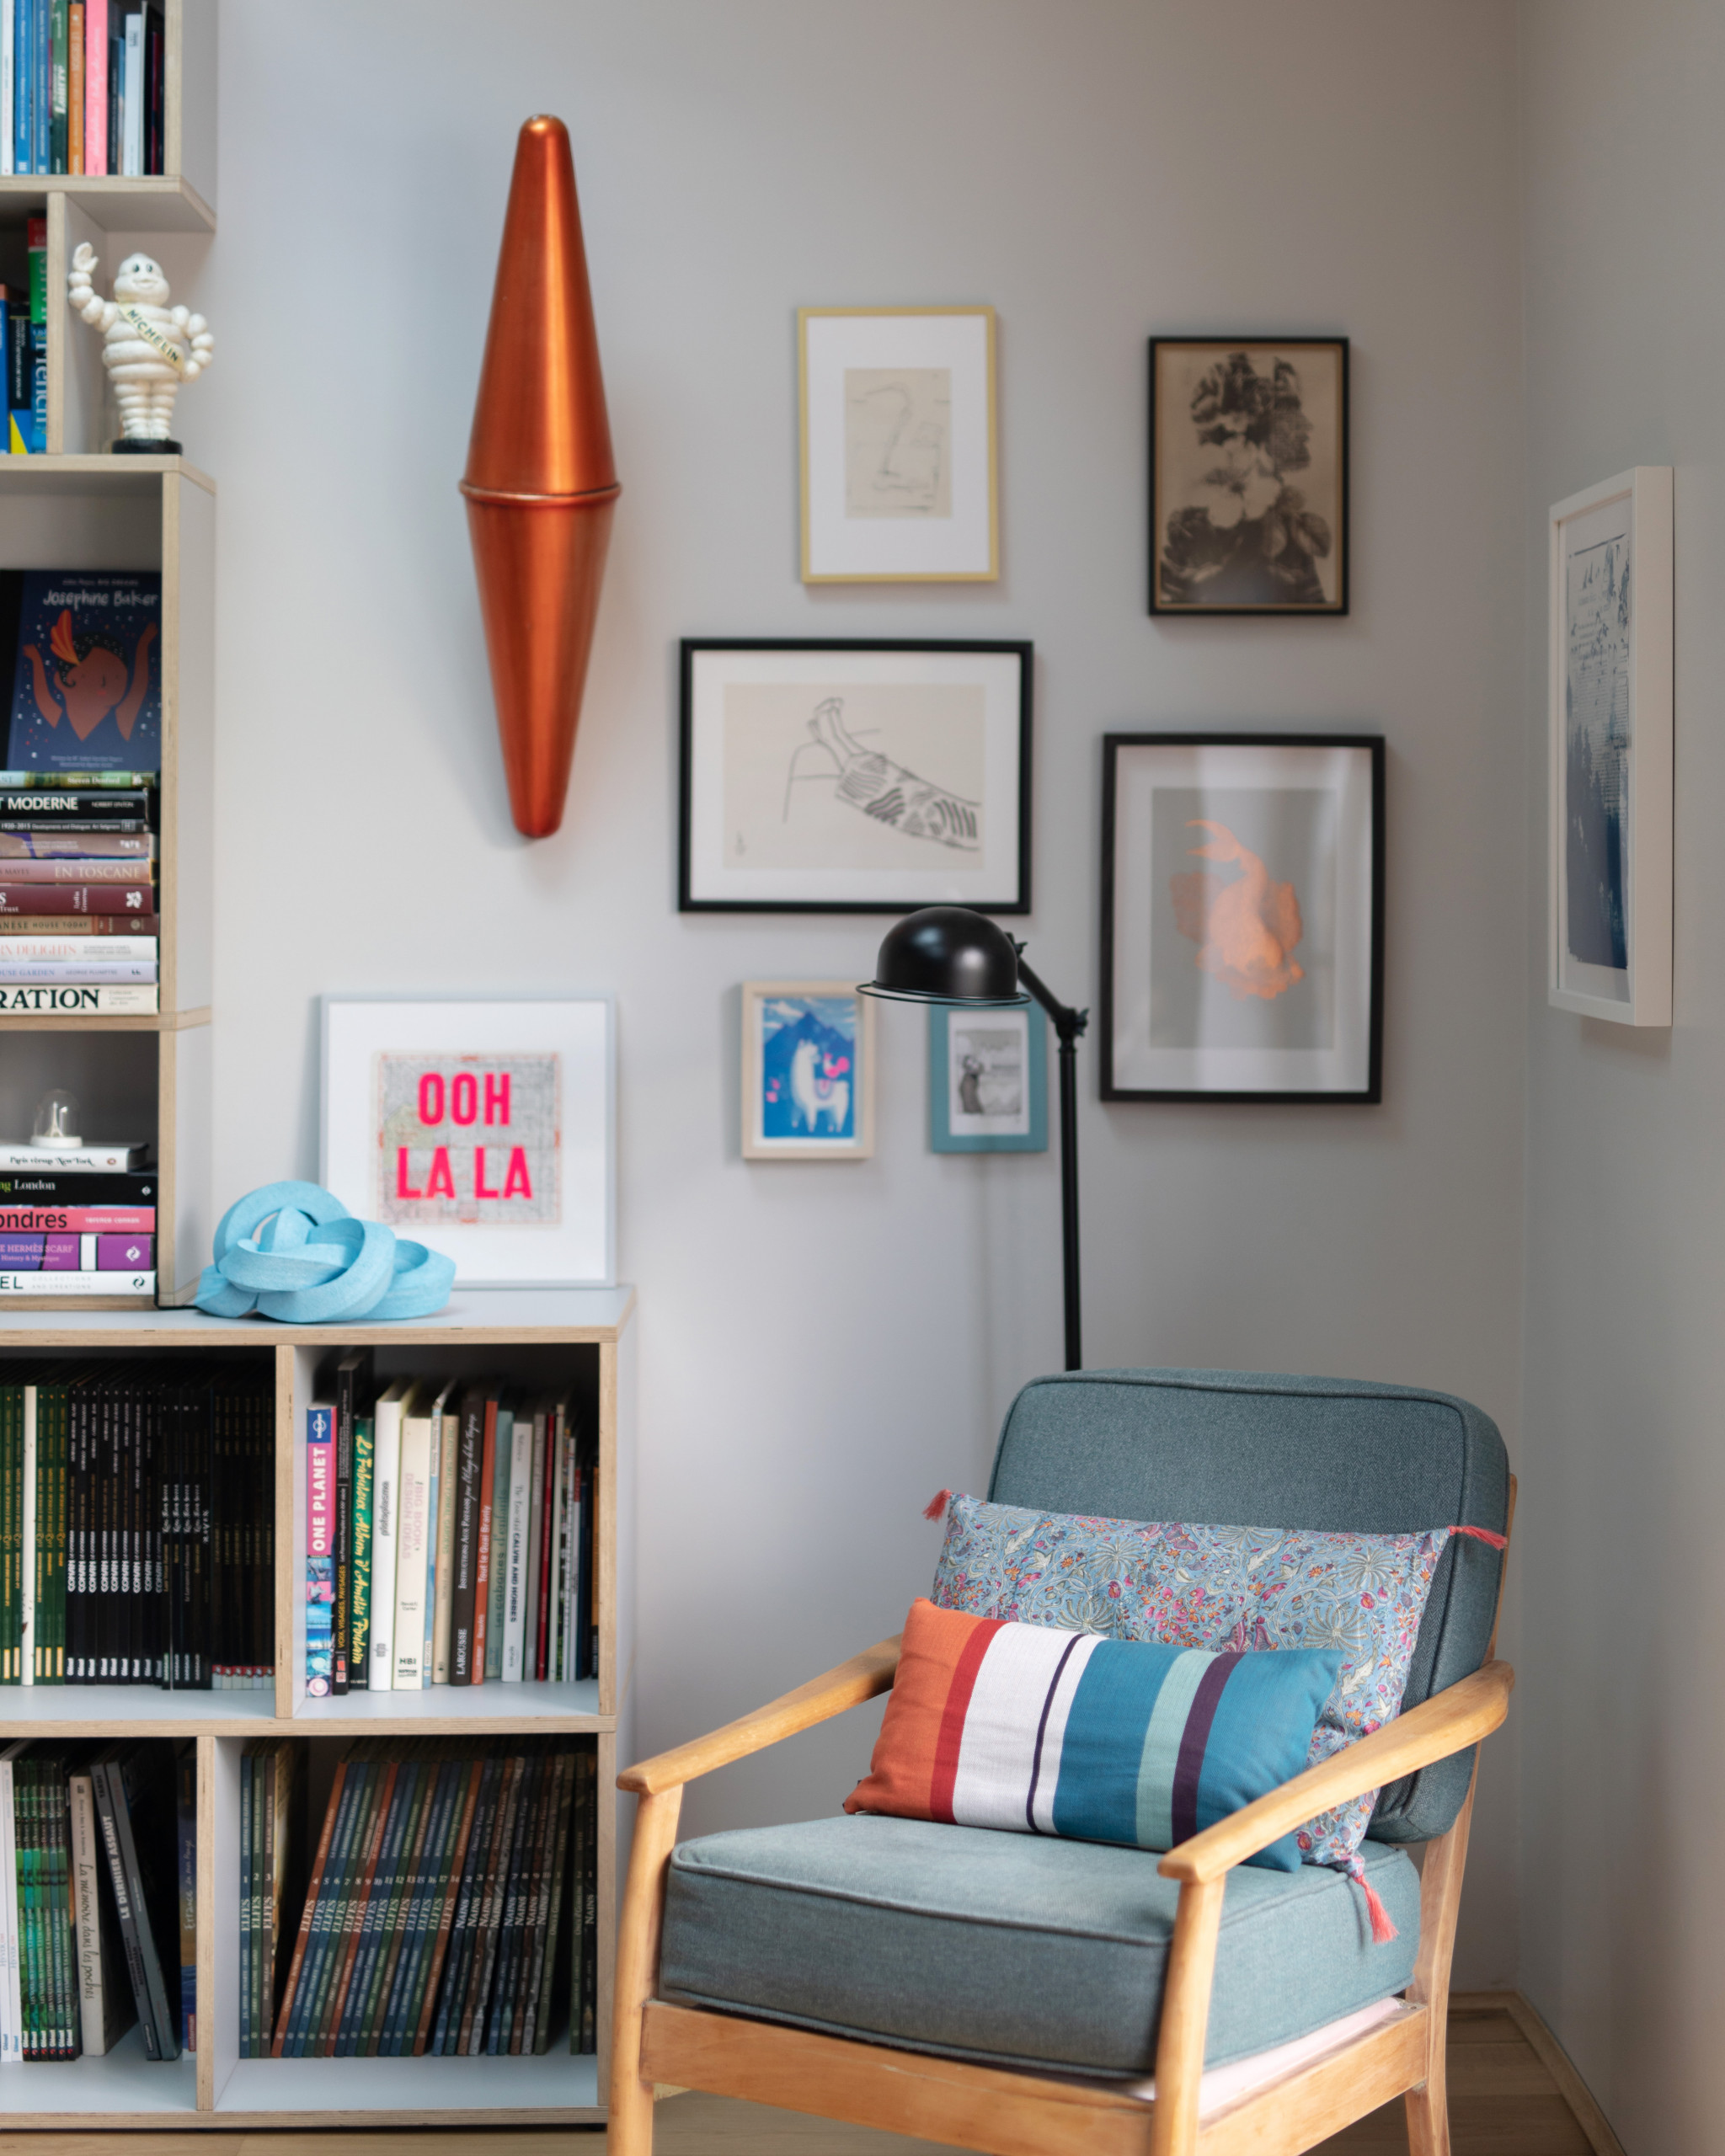 Working from home - how to blend your office in an open plan